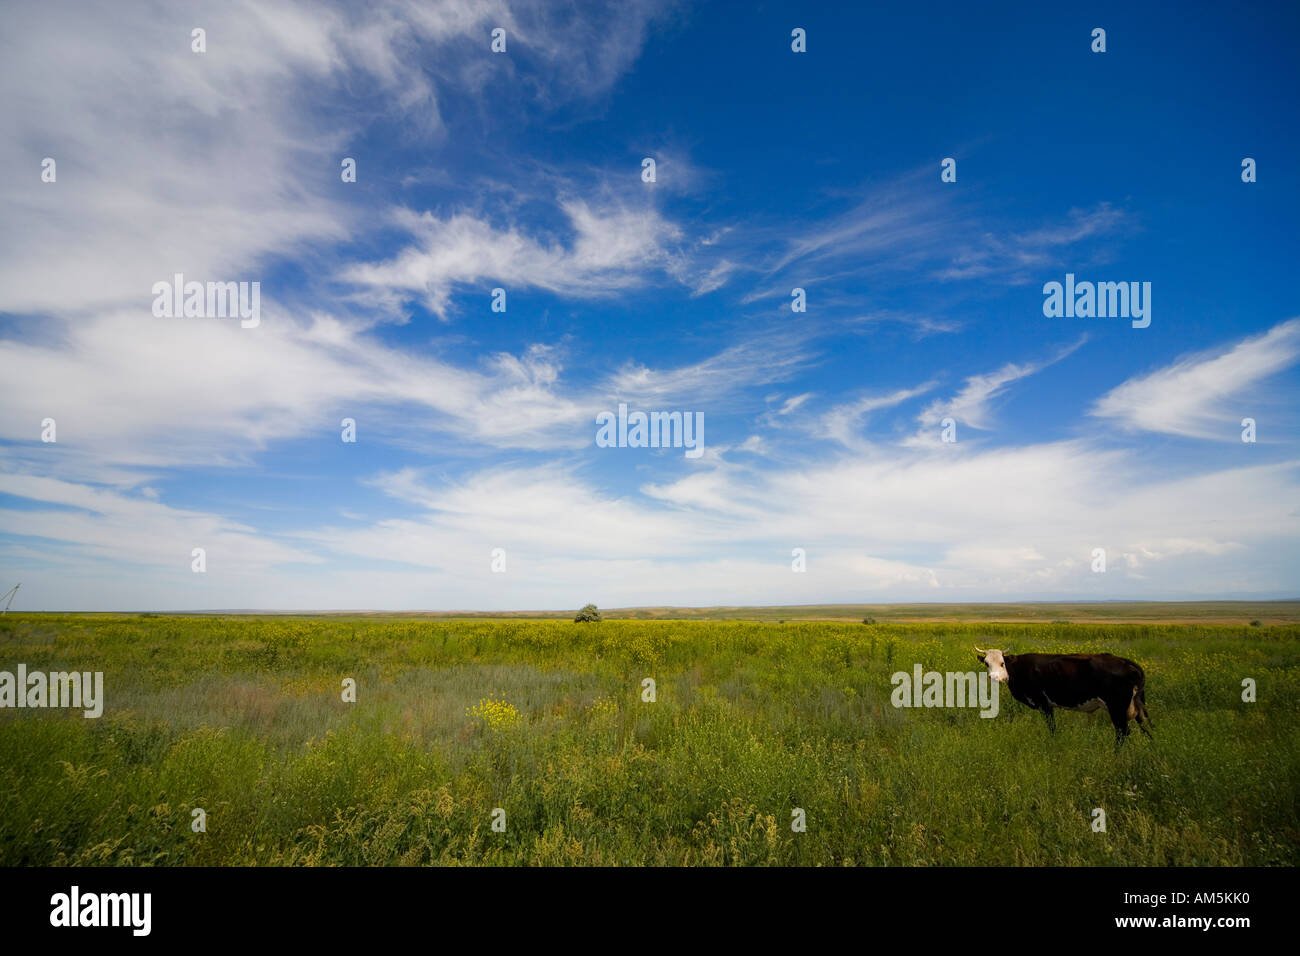 Lonely cow in the Great Kazakh or Kirgiz Steppe 150 km west of Almaty, Kazakhstan. On the road from Kora to Tamgaly Stock Photo